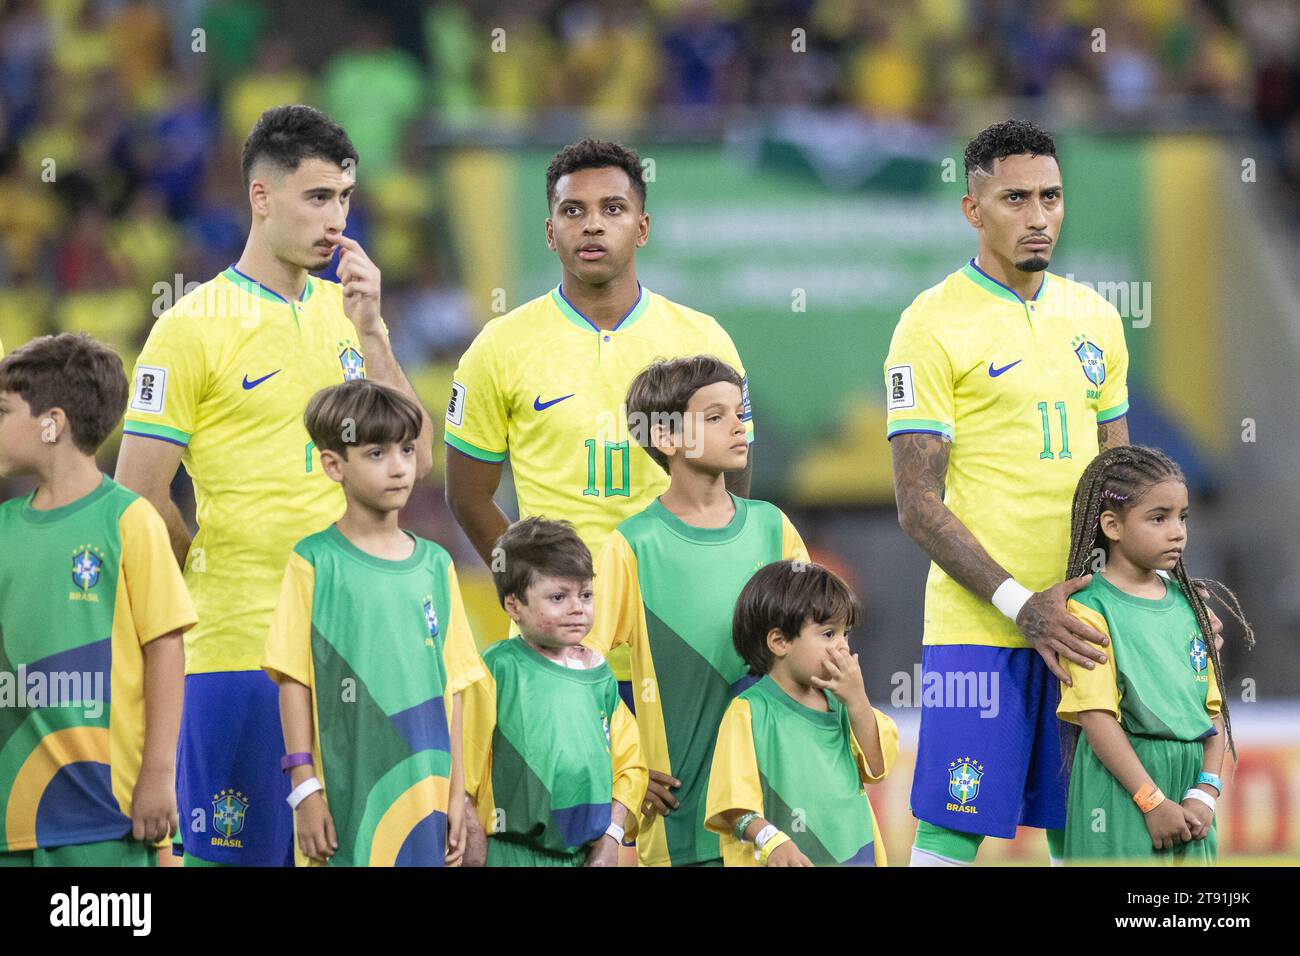 Rio De Janeiro, Brazil. 21st Nov, 2023. RIO DE JANEIRO, BRAZIL - NOVEMBER 21: Rodrygo of Brazil looks on before a match between Brazil and Argentina as part of 2026 FIFA World Cup South American Qualification at Maracana Stadium on November 21, 2023 in Rio de Janeiro, Brazil. (Photo by Wanderson Oliveira/PxImages) Credit: Px Images/Alamy Live News Stock Photo